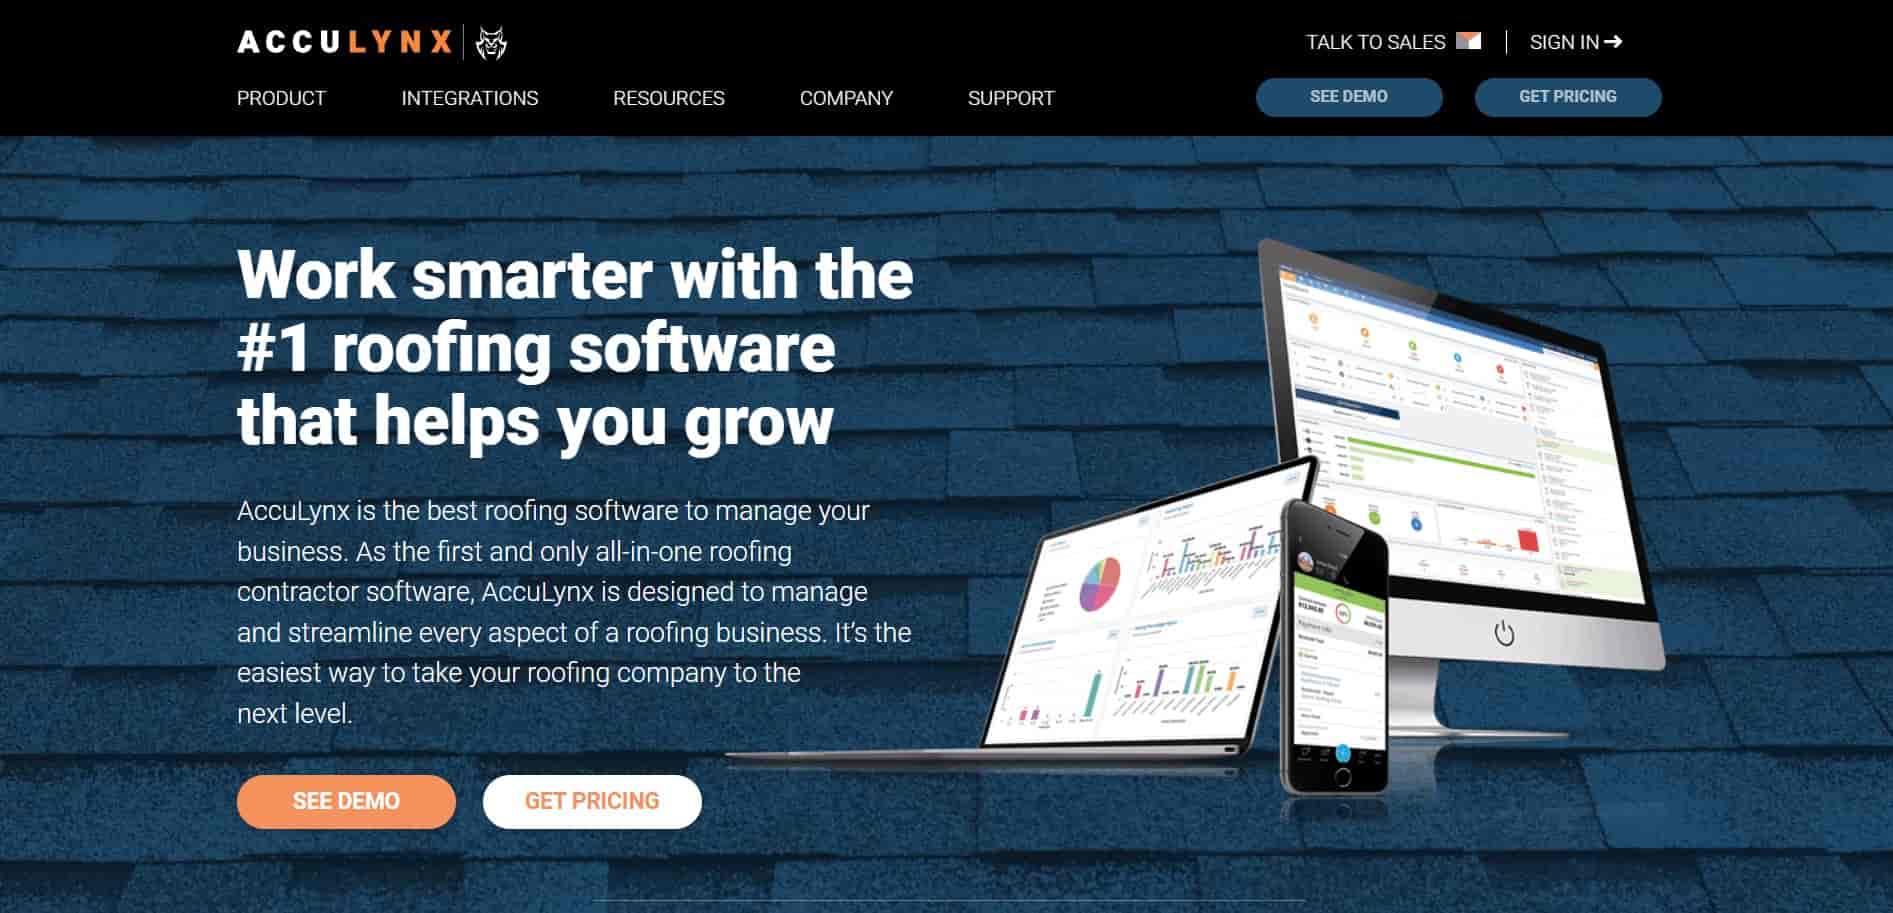 Homepage of AccuLynx website mentioning #1 roofing software